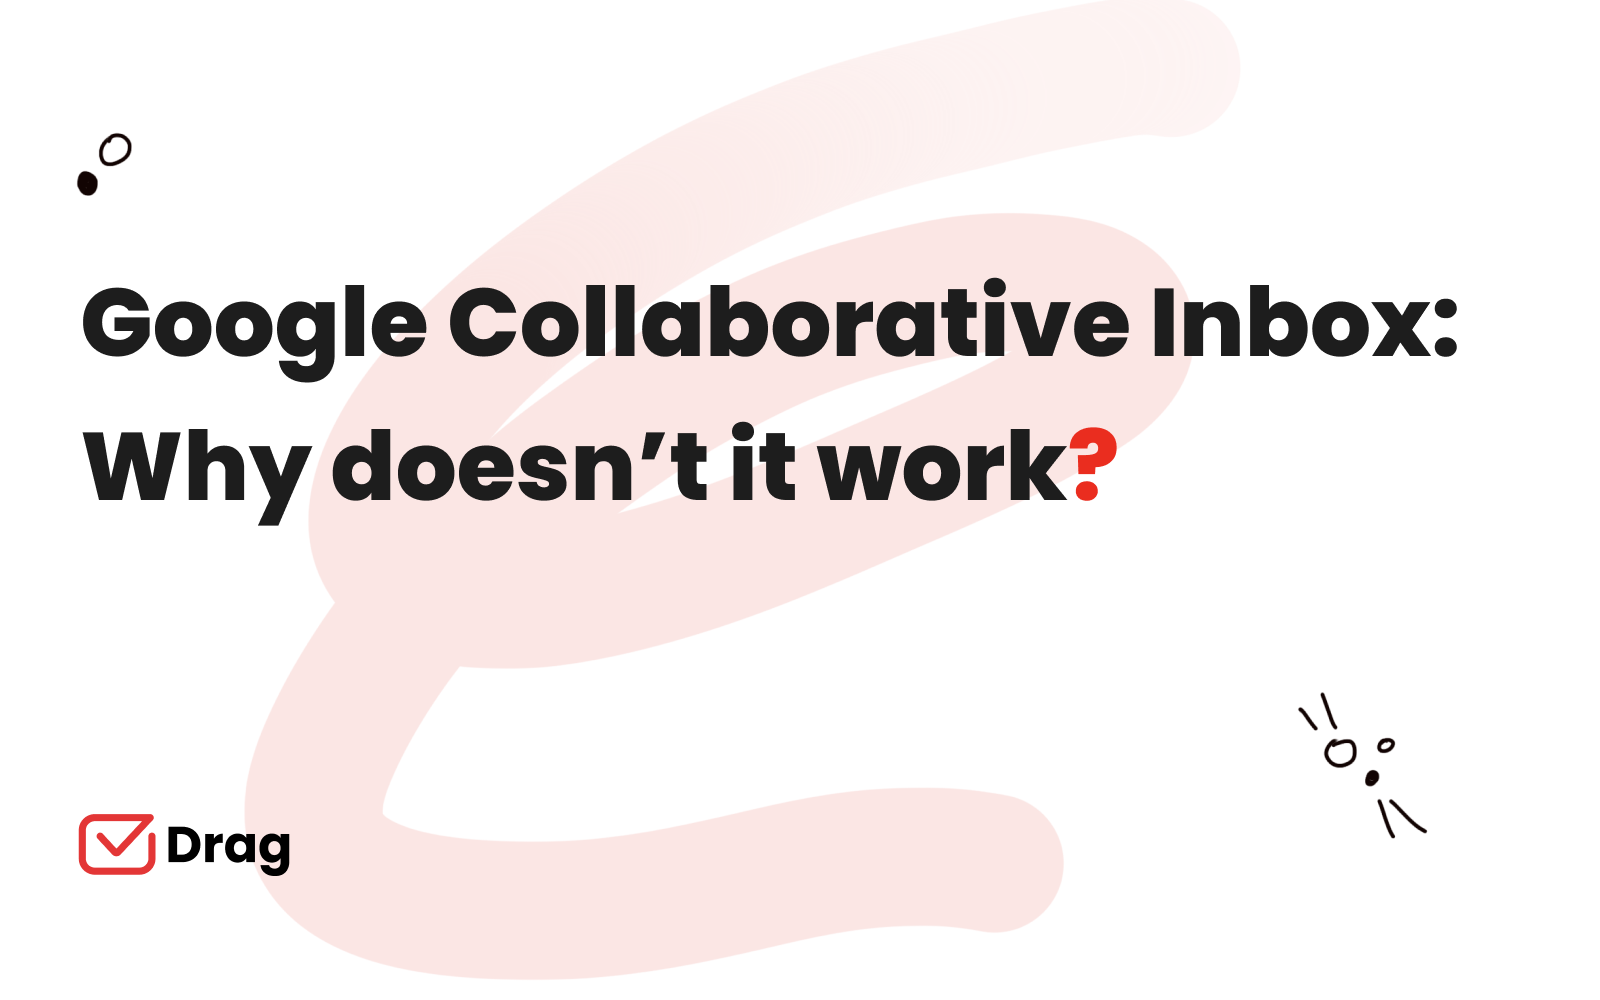 google collaborative inbox: why doesn't it work?